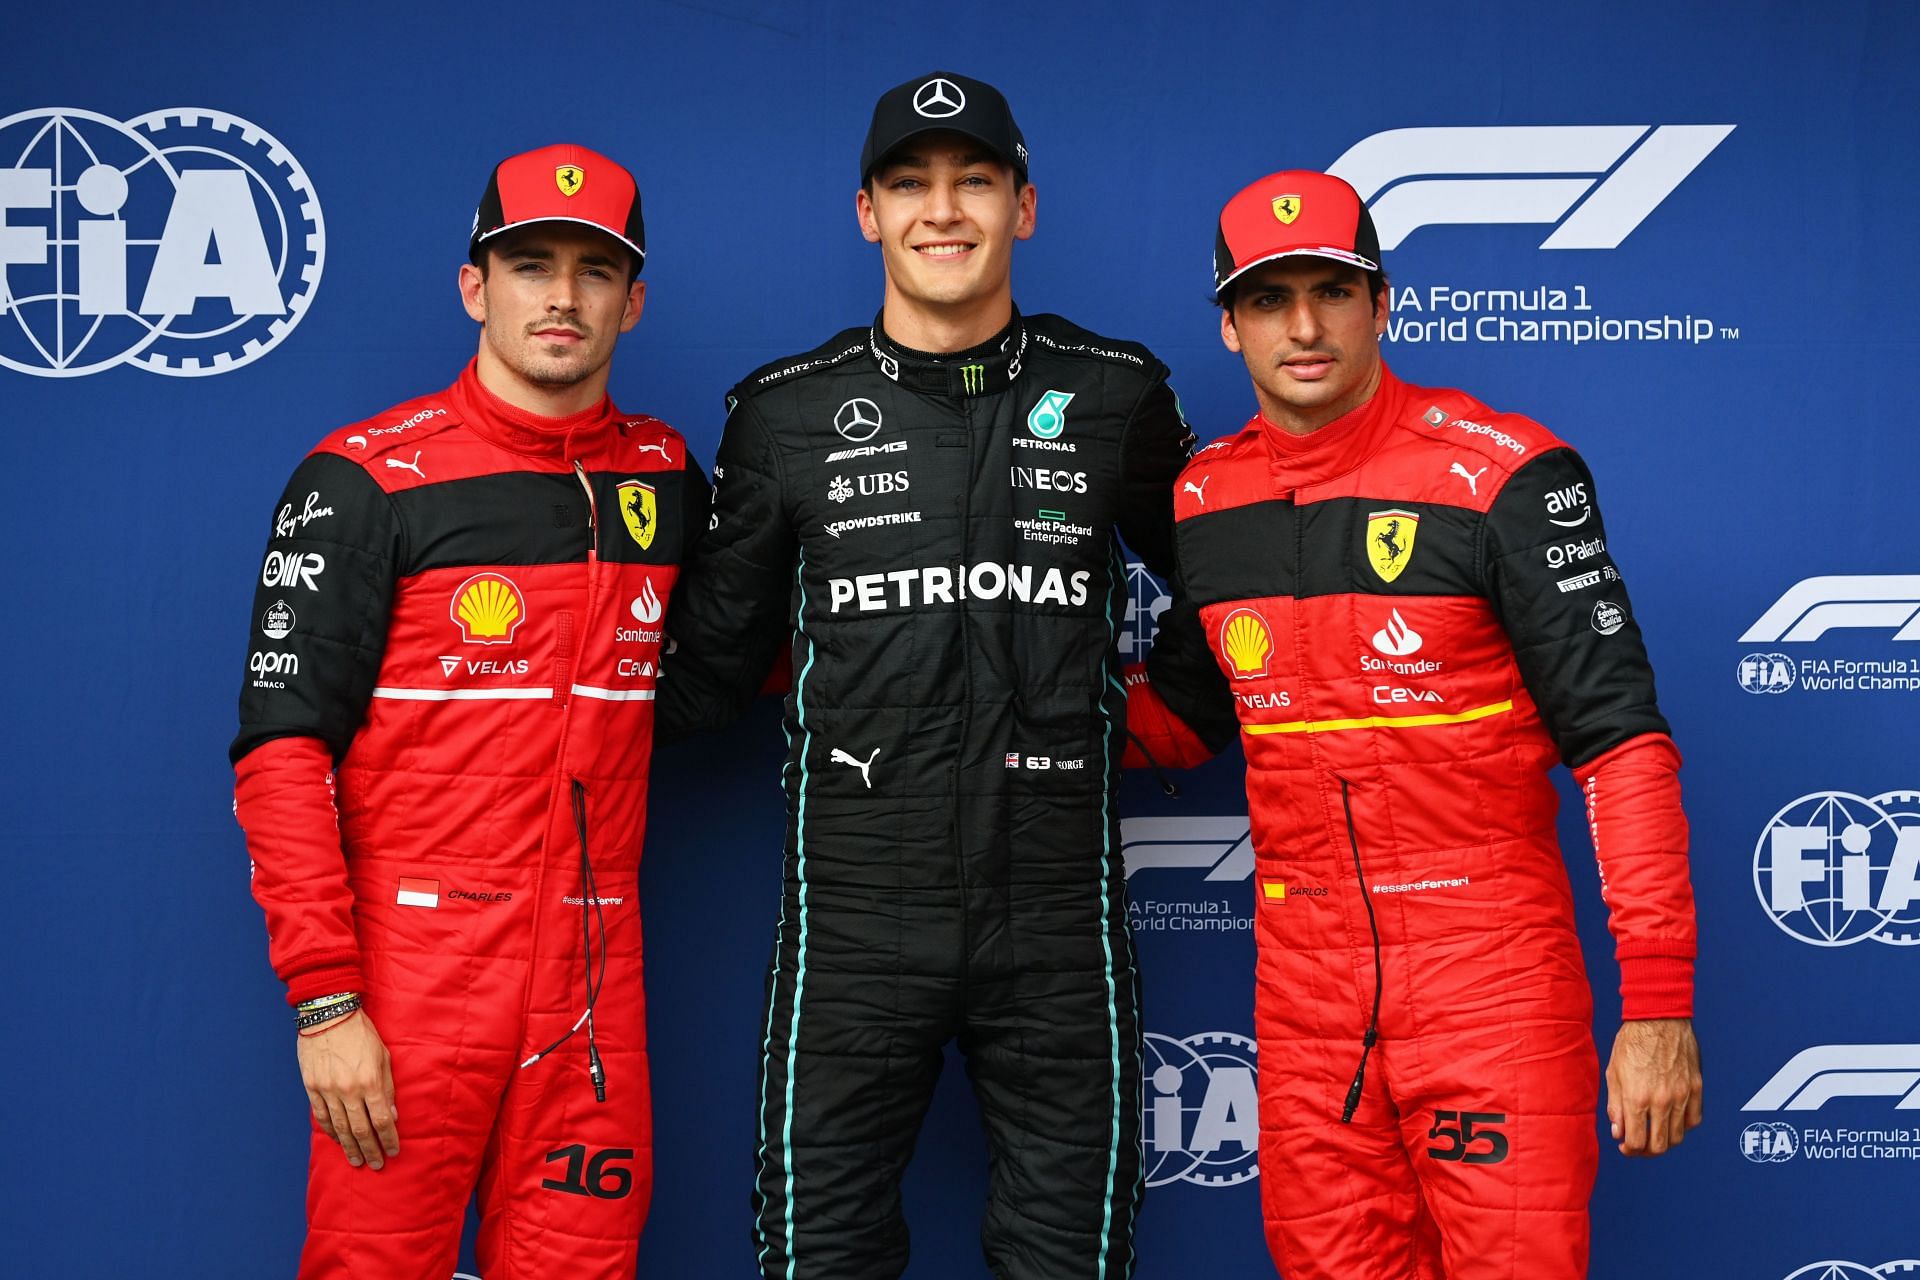 F1 Grand Prix of Hungary - Qualifying - (L to R) Charles Leclerc, George Russell, and Carlos Sainz at Hungaroring